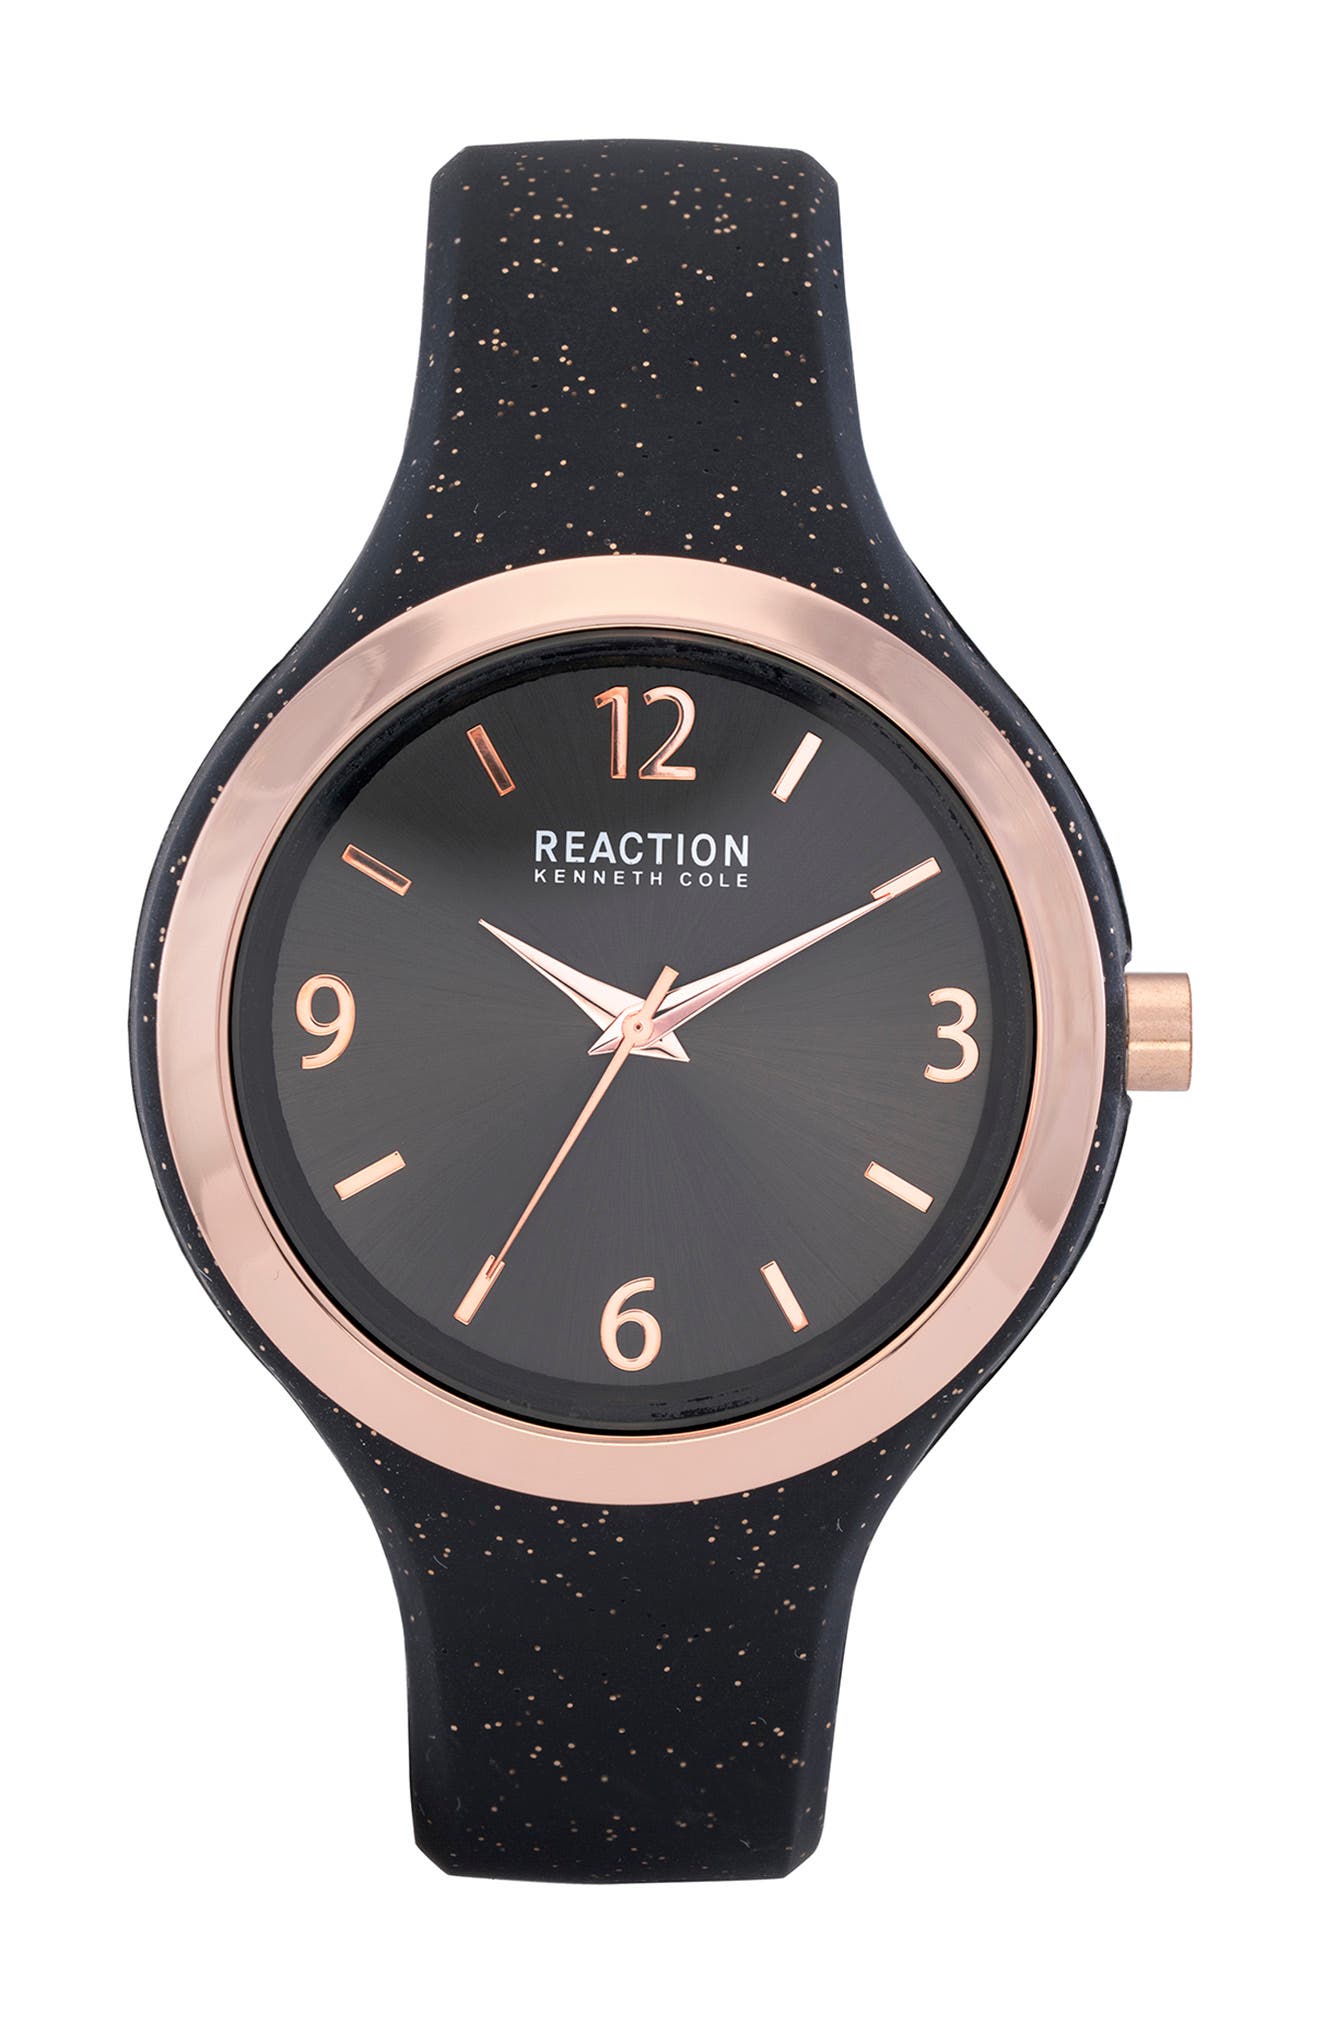 Kenneth Cole Reaction Women's Reaction 3 Hands Black Dial Silicone Watch